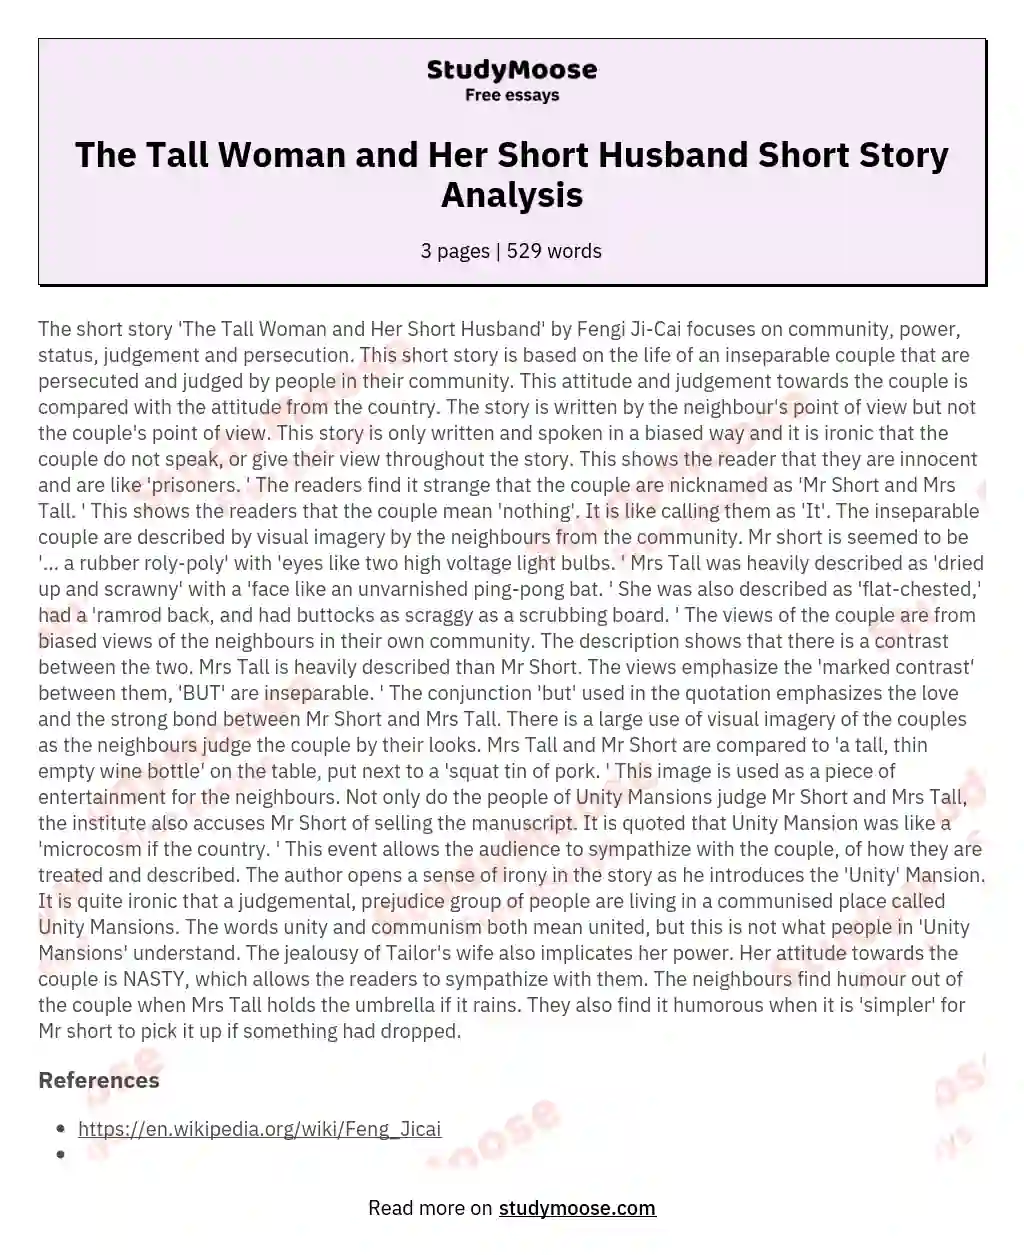 The Tall Woman and Her Short Husband Short Story Analysis